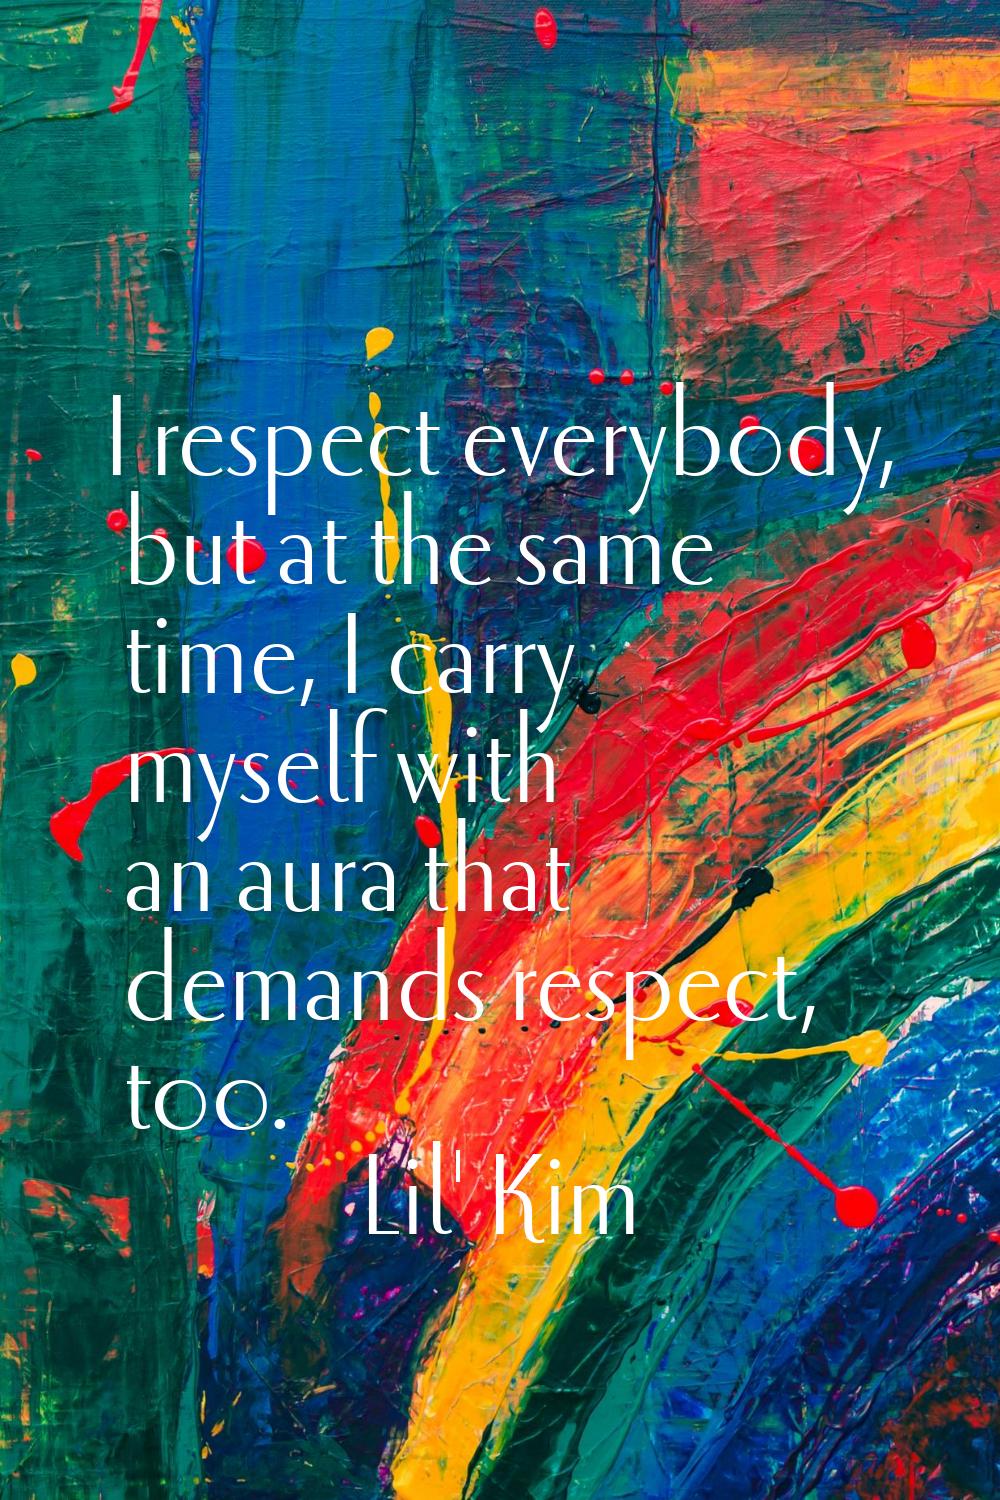 I respect everybody, but at the same time, I carry myself with an aura that demands respect, too.